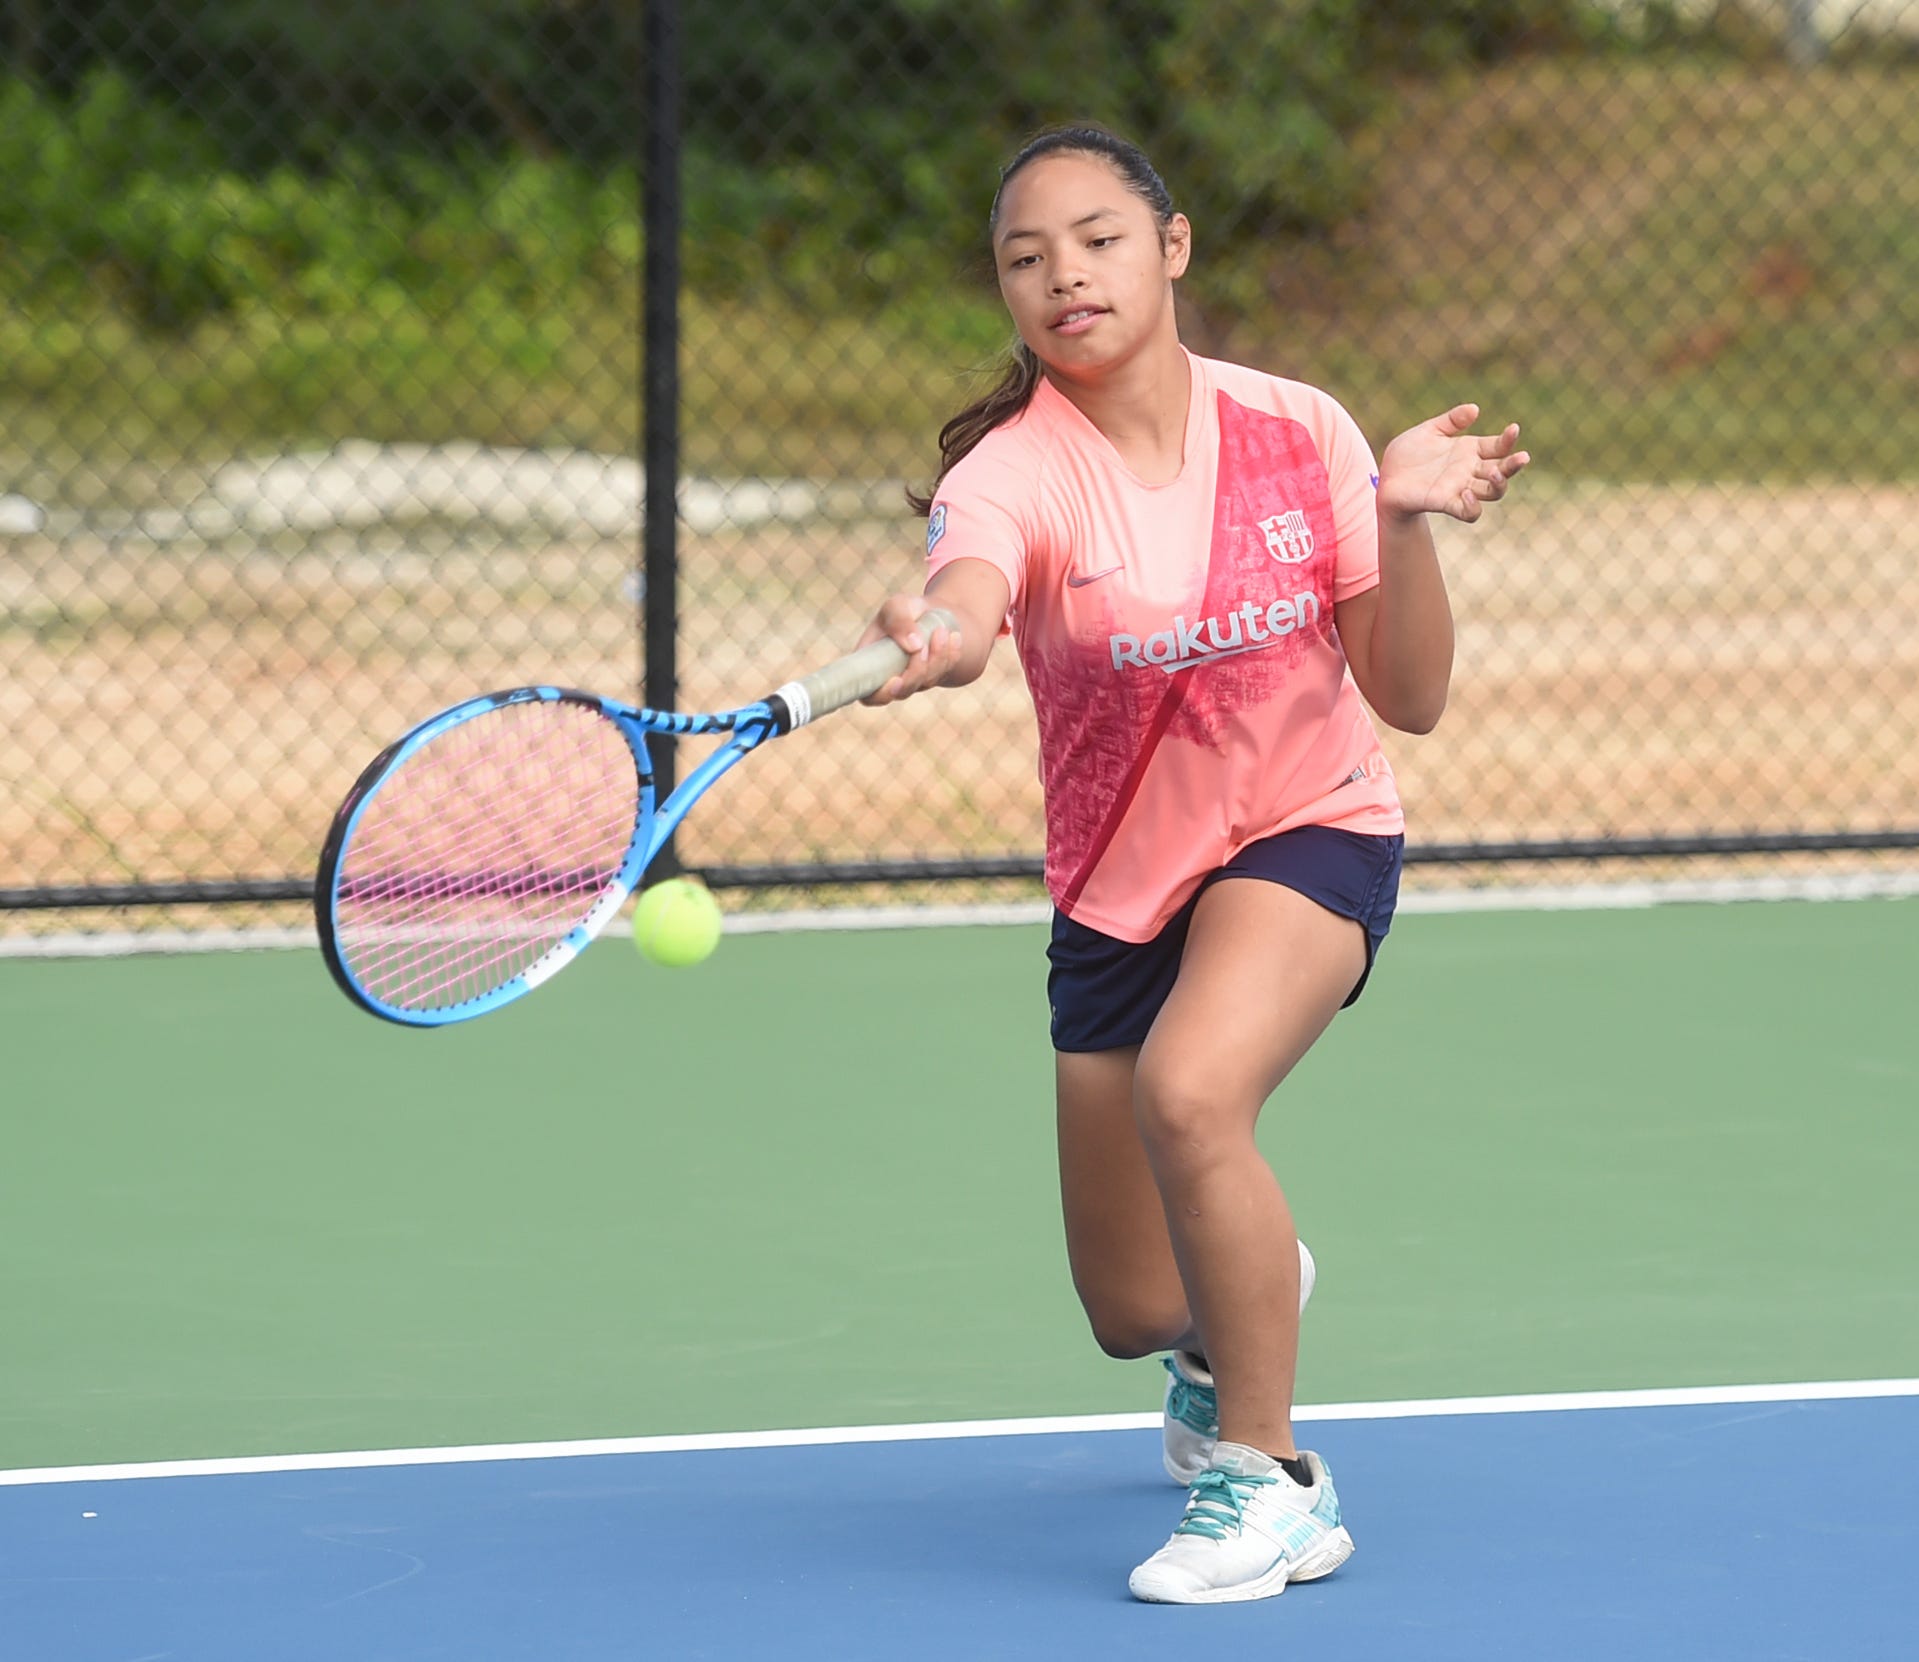 Junior national tennis player Amelie Perez-Terlaje warms up during a Guam National Tennis Federation membership drive at the Guam National Tennis Center in Dededo in this Jan. 12, 2020, file photo.